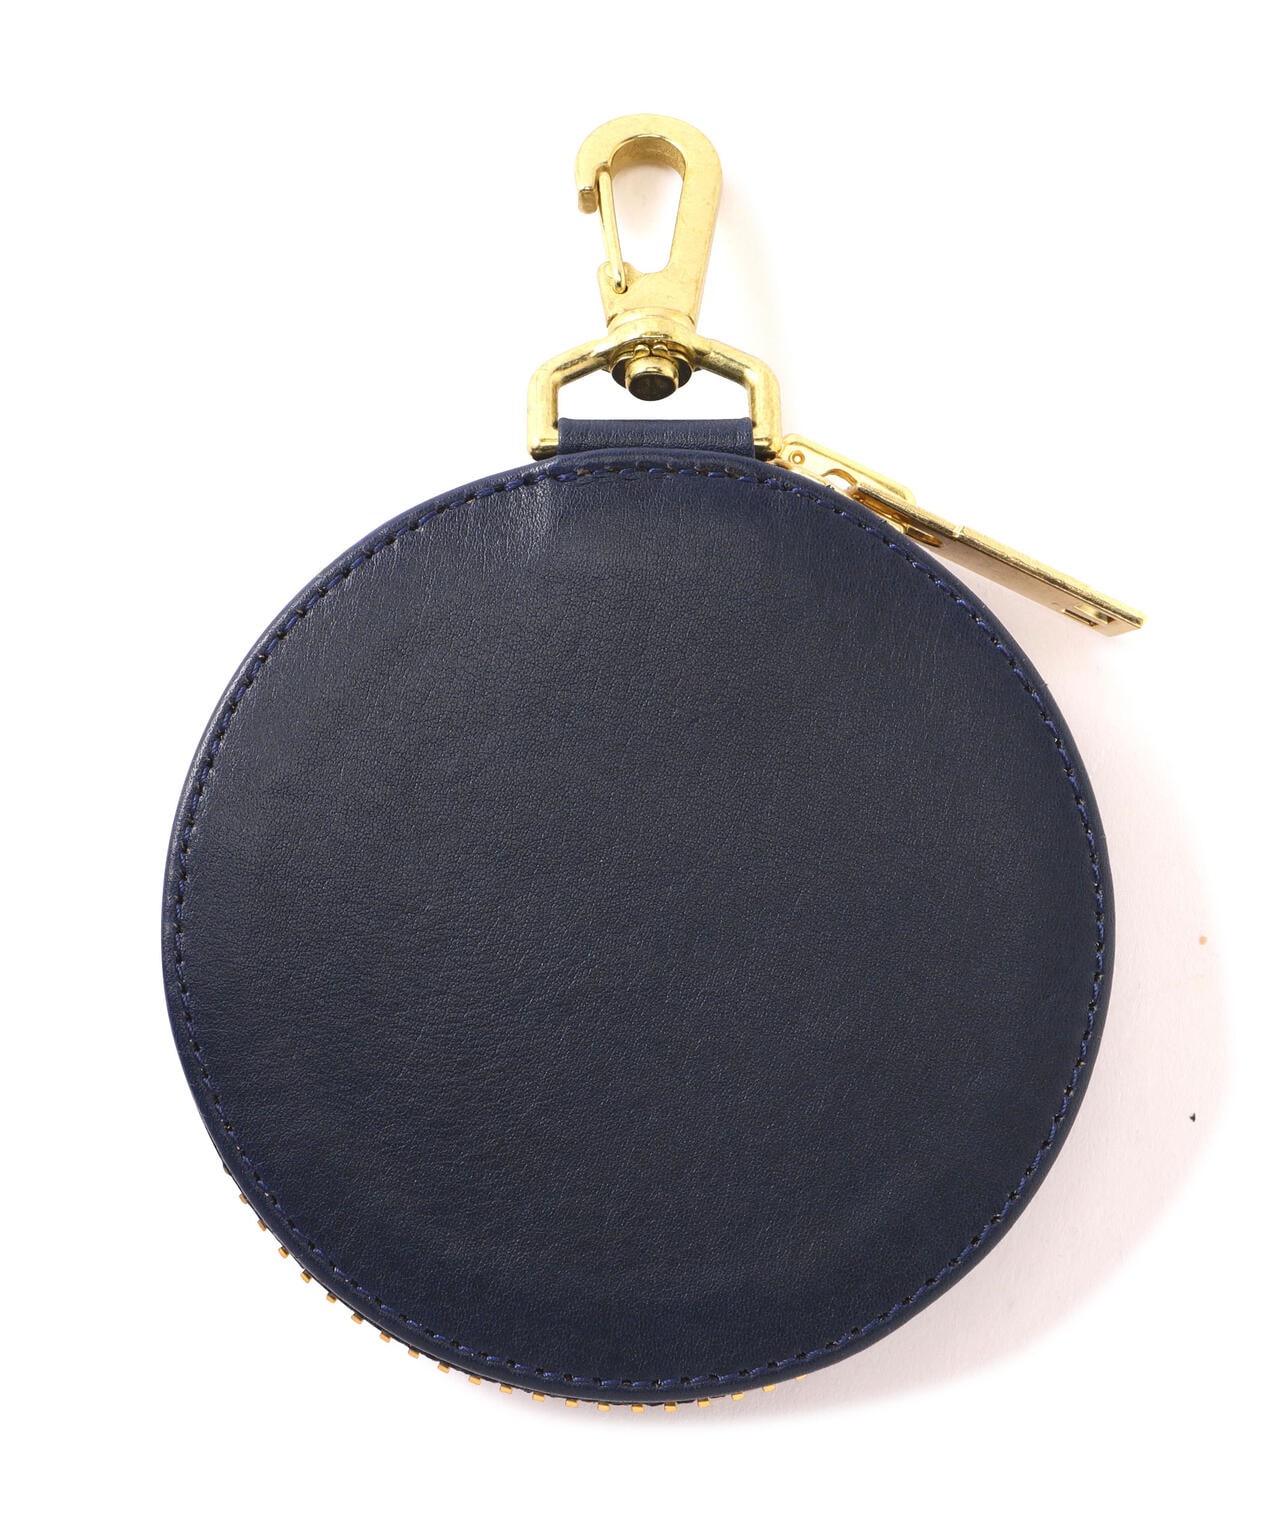 Blackmeans/ブラックミーンズ/LEATHER COIN CASE/レザーコインケース ...